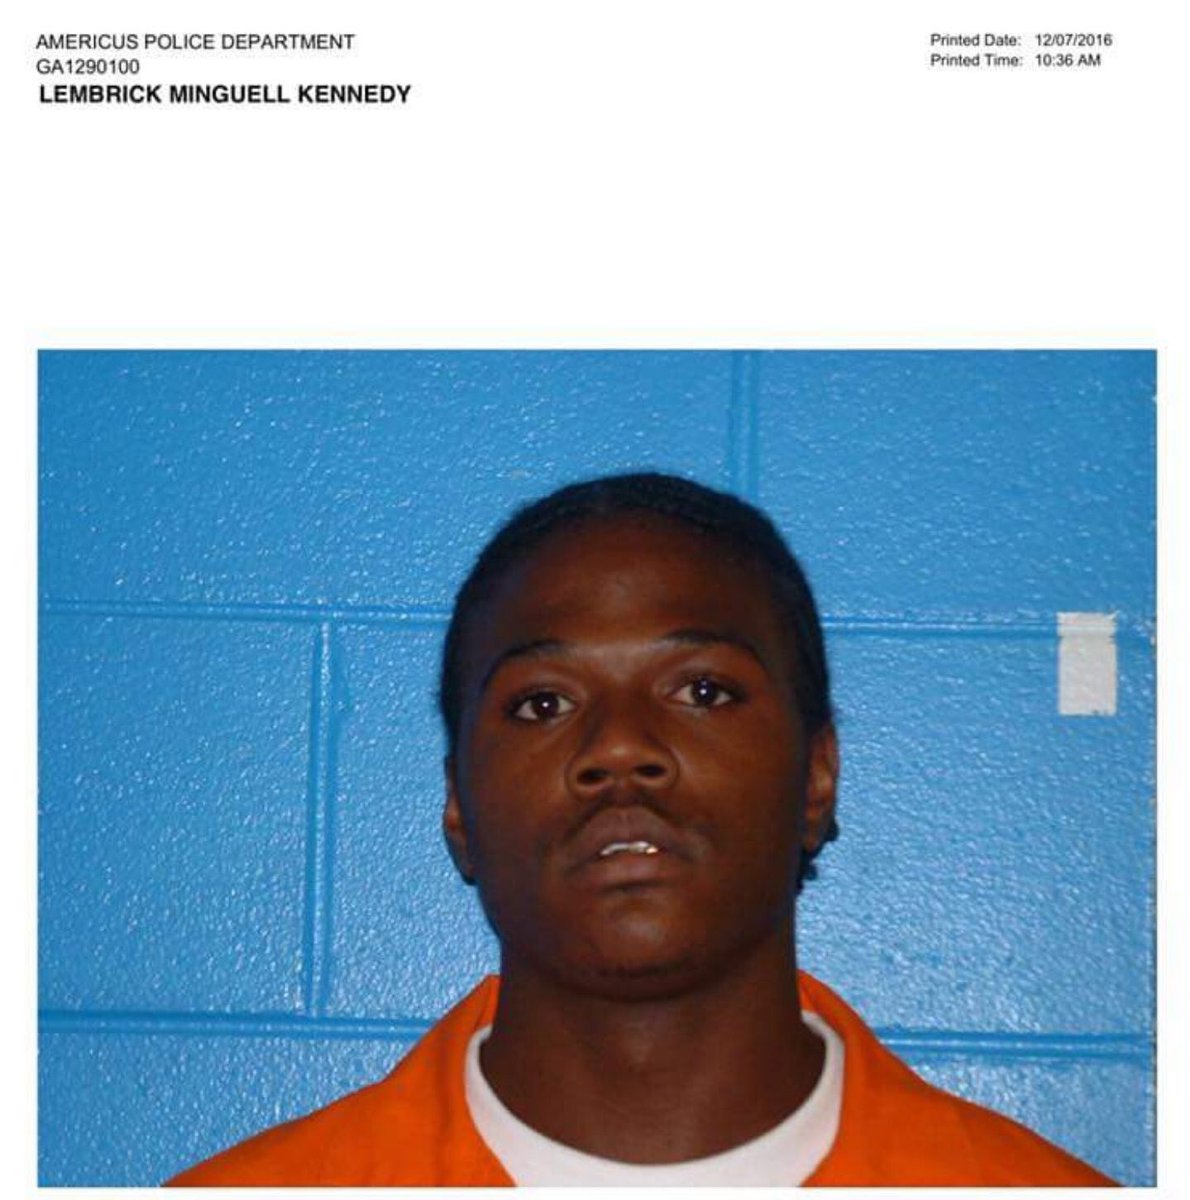 #BREAKING: @GBI_GA offers $20,000 reward for info leading to arrest of Minguell Lembrick.
#copshooting